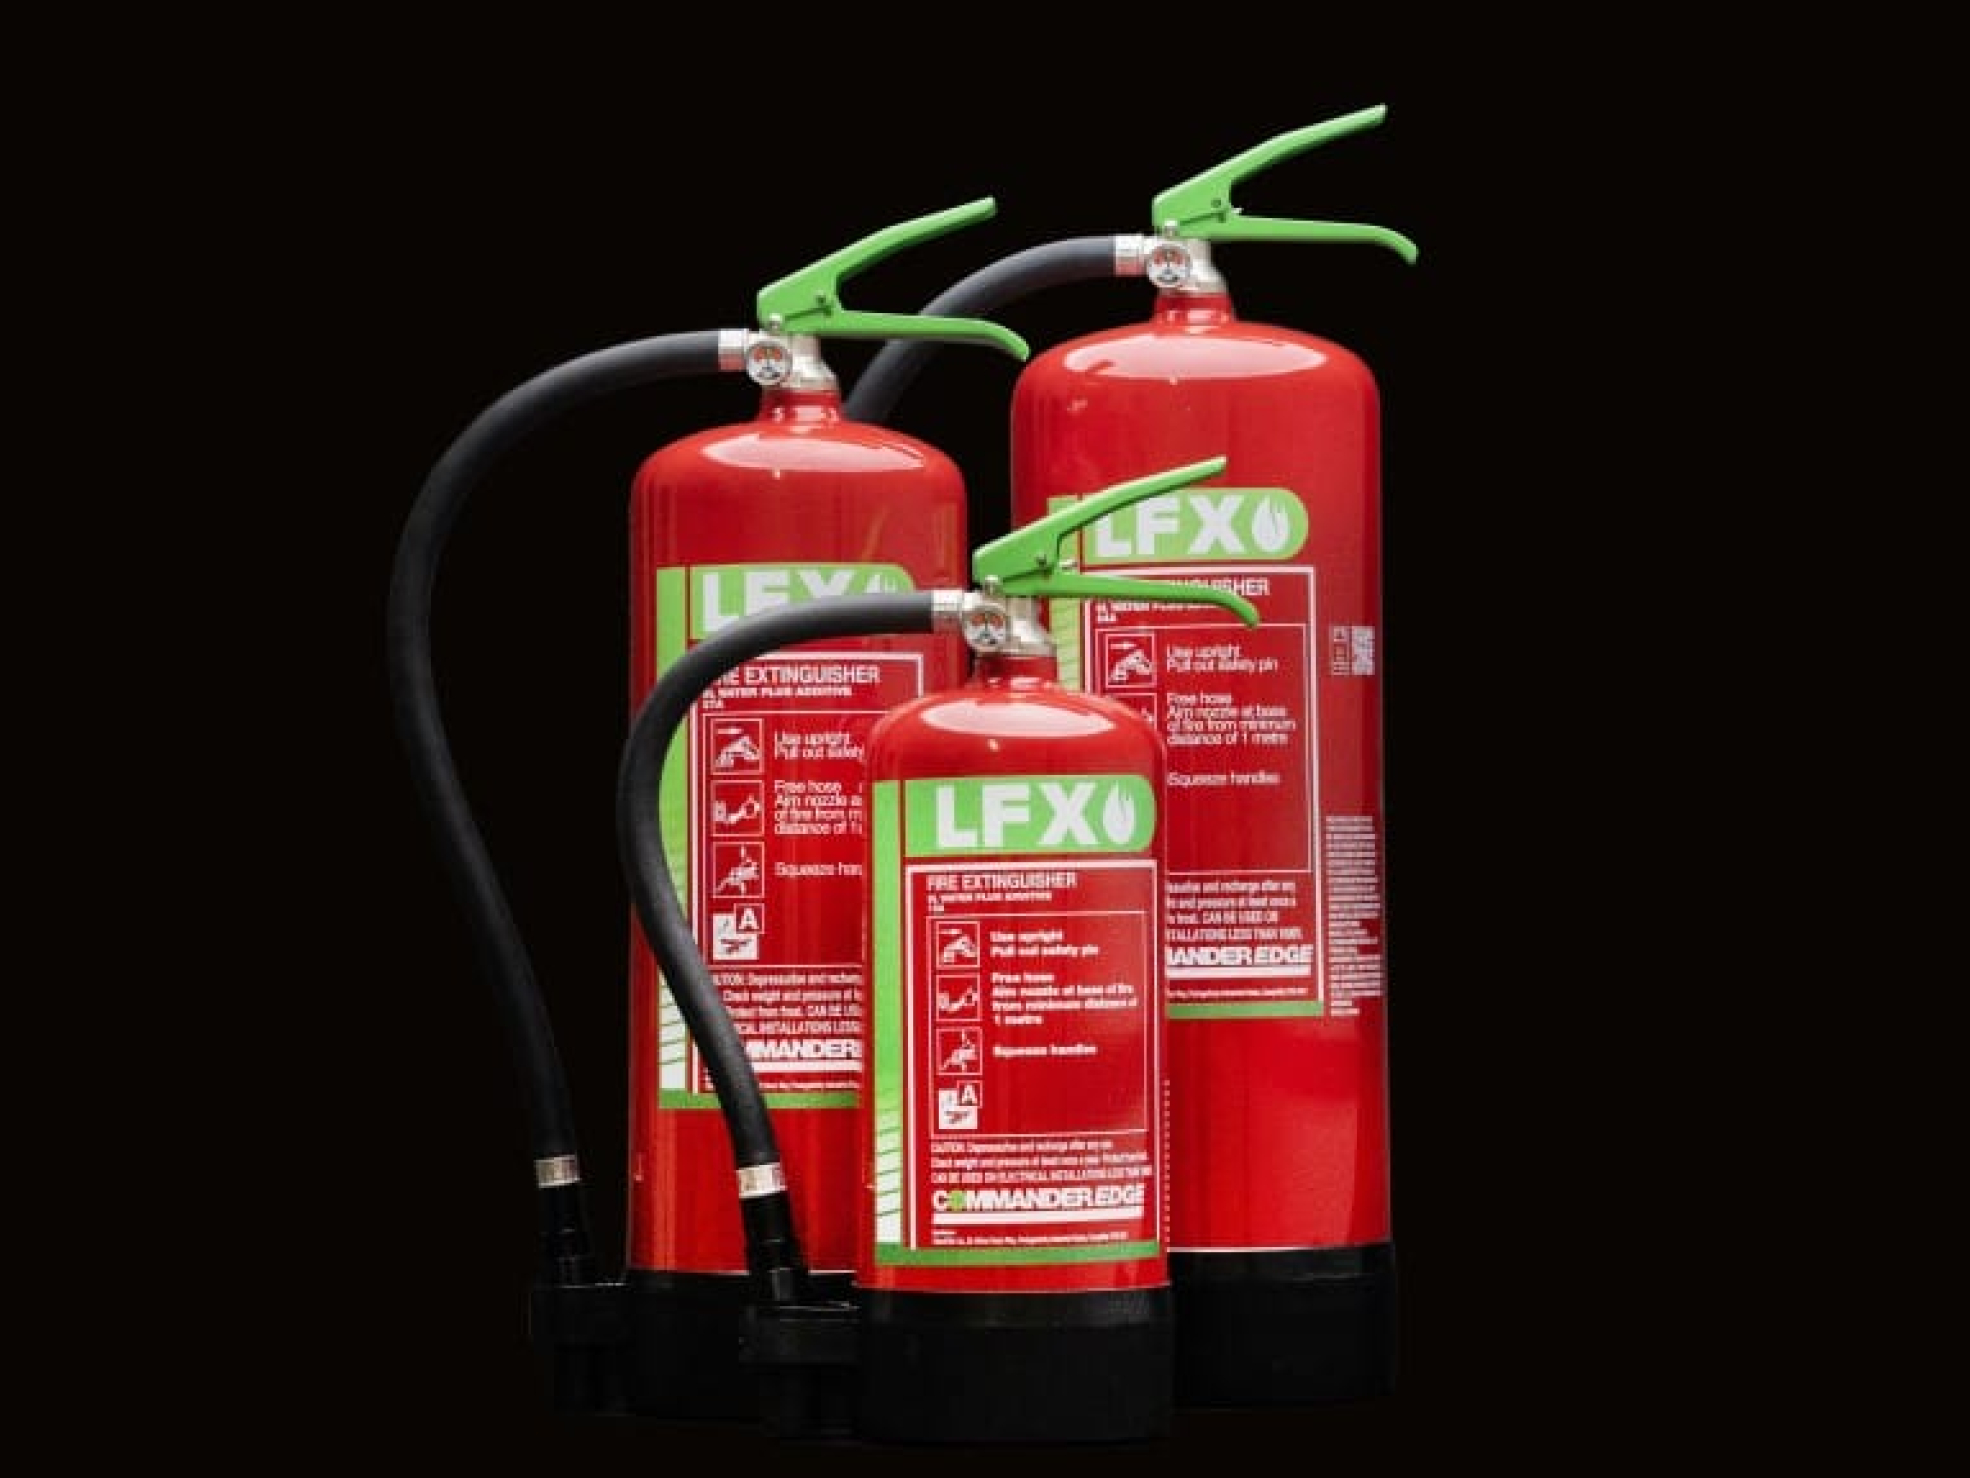 CheckFire's innovative LFX fire extinguisher range for lithium-ion battery fires